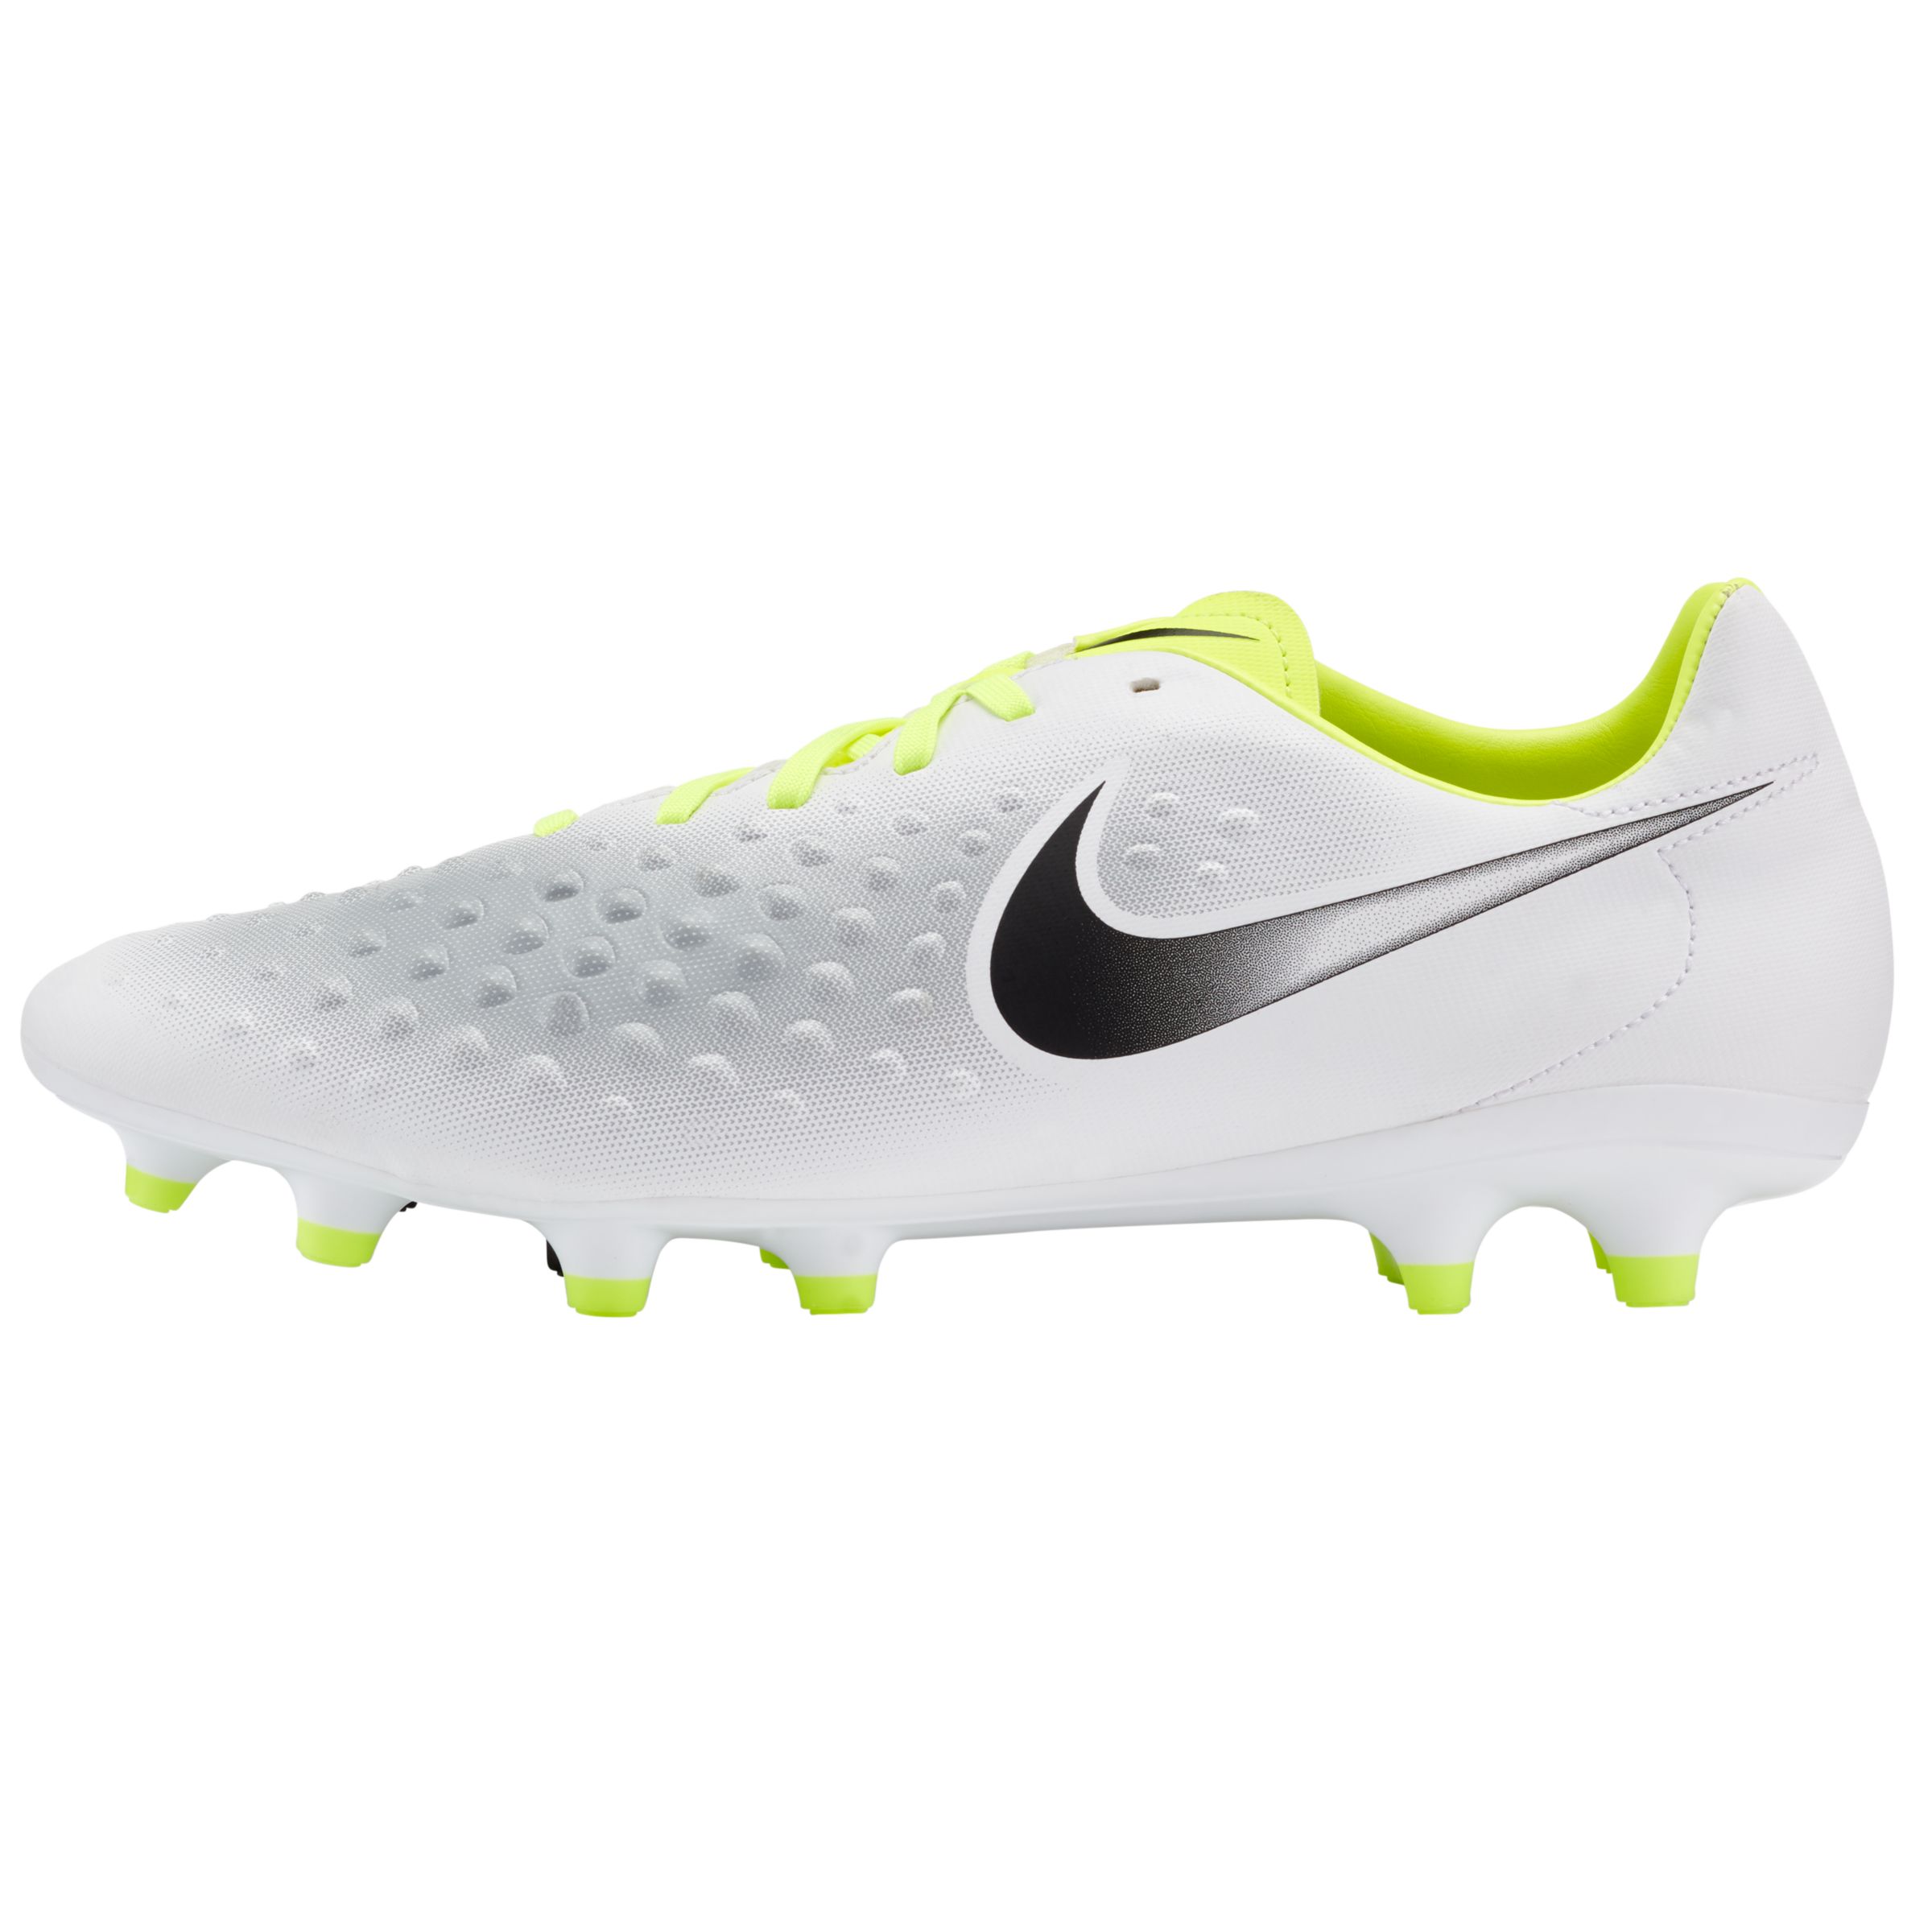 Price Melt Down Nike MagistaX Proximo II IC By Men Online